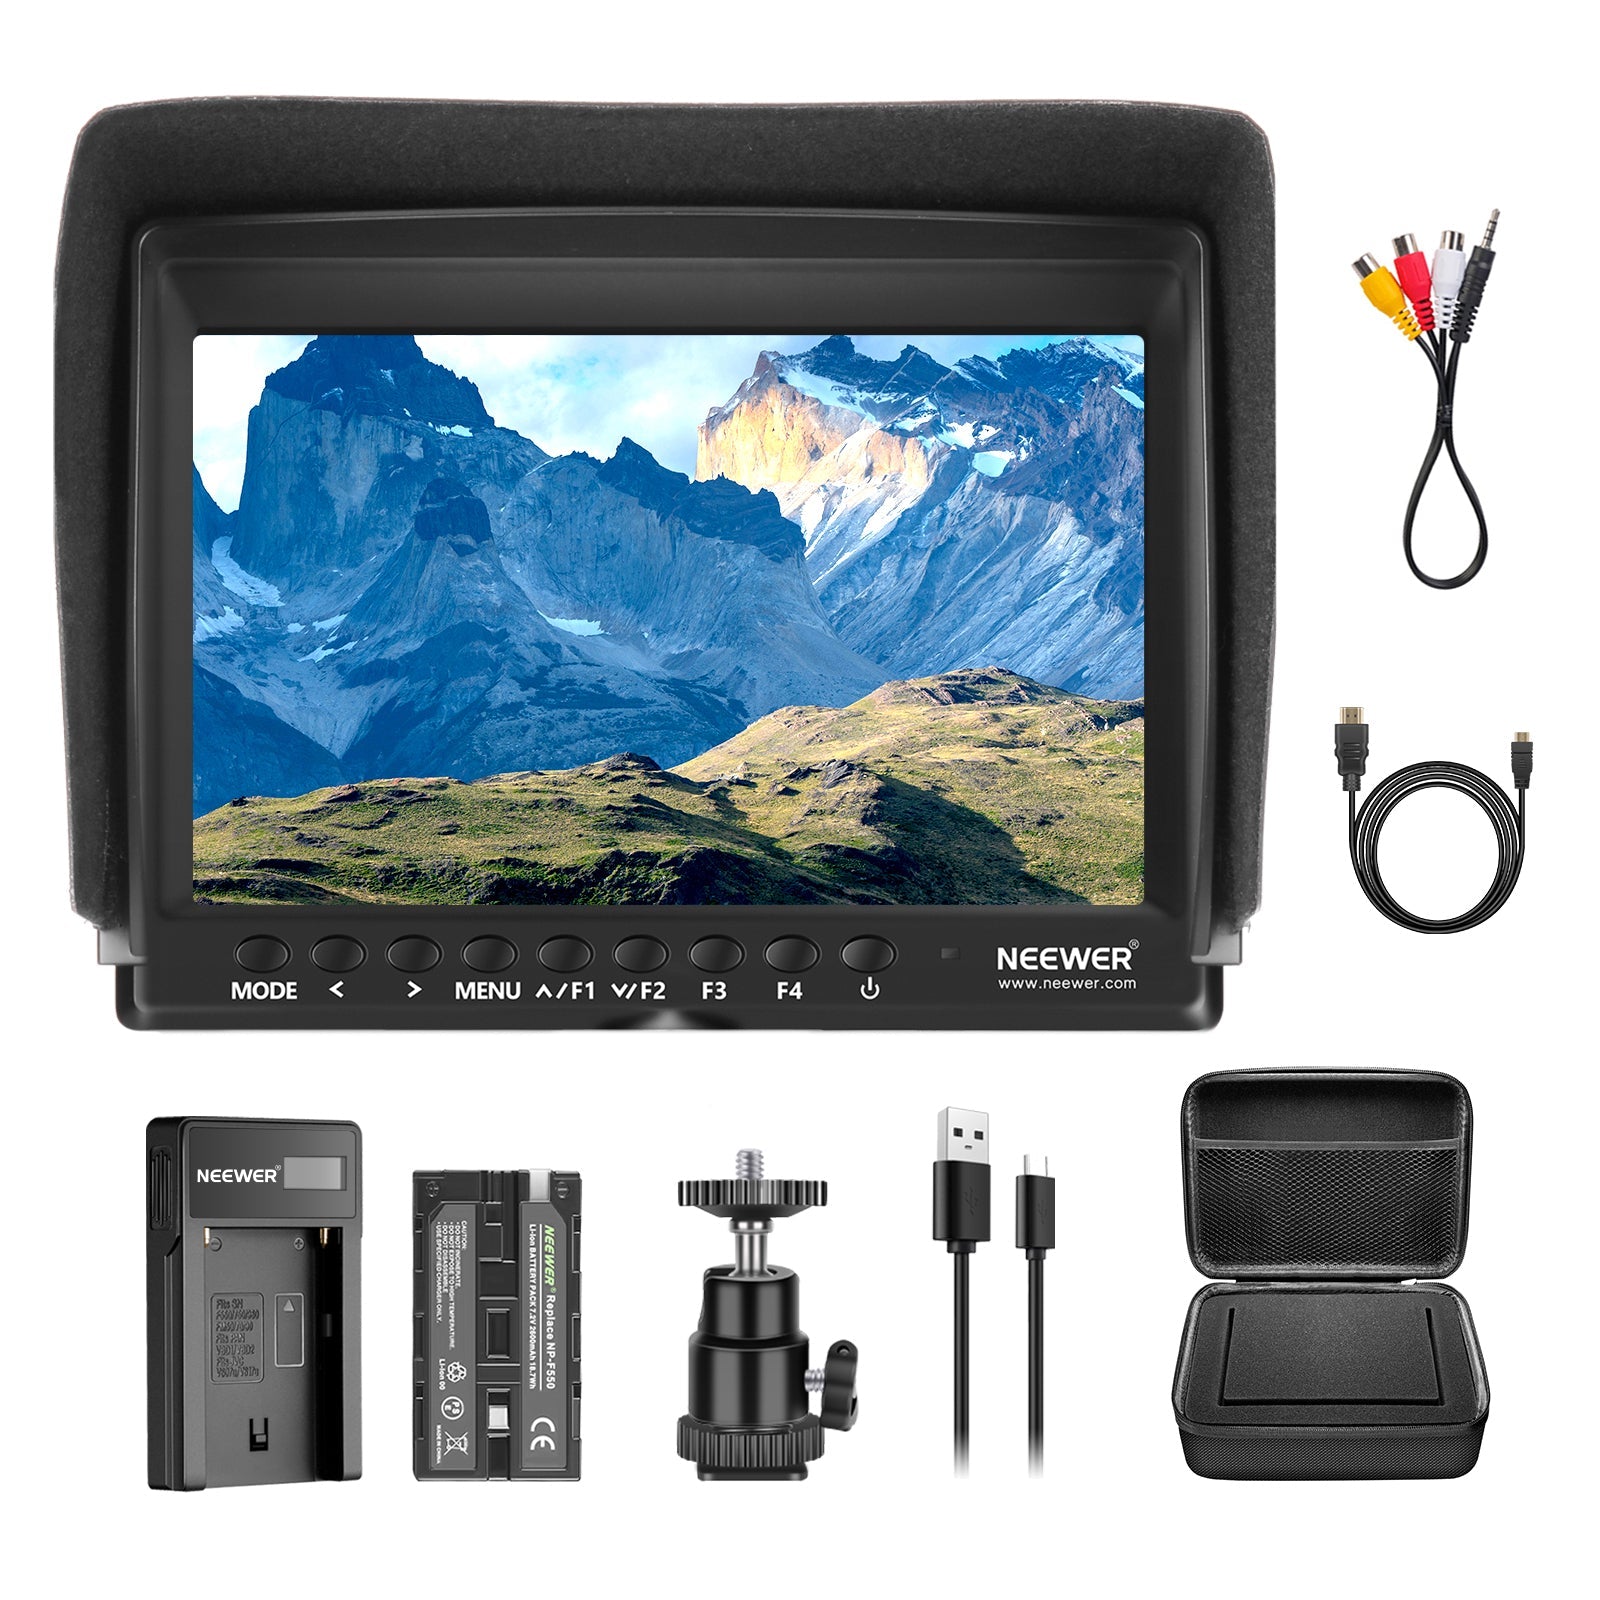 NEEWER F100 7 Inch HD Camera Field Monitor Kit With Case